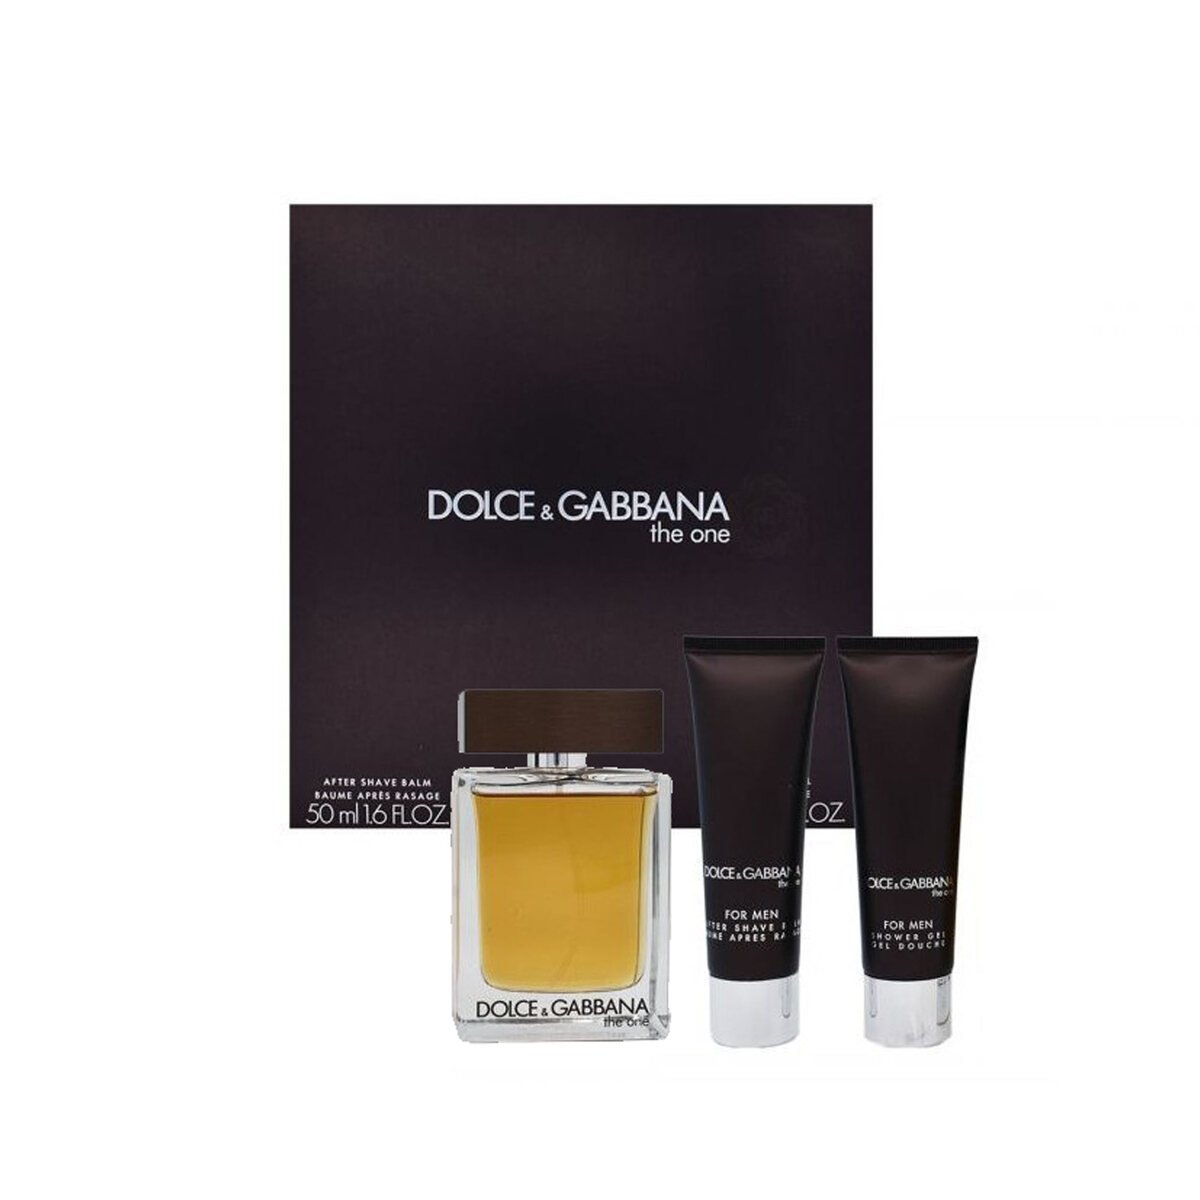 Dolce & Gabbana The One EDT for Men 100ml + Shower Gel 50ml + After Shave Balm 50ml